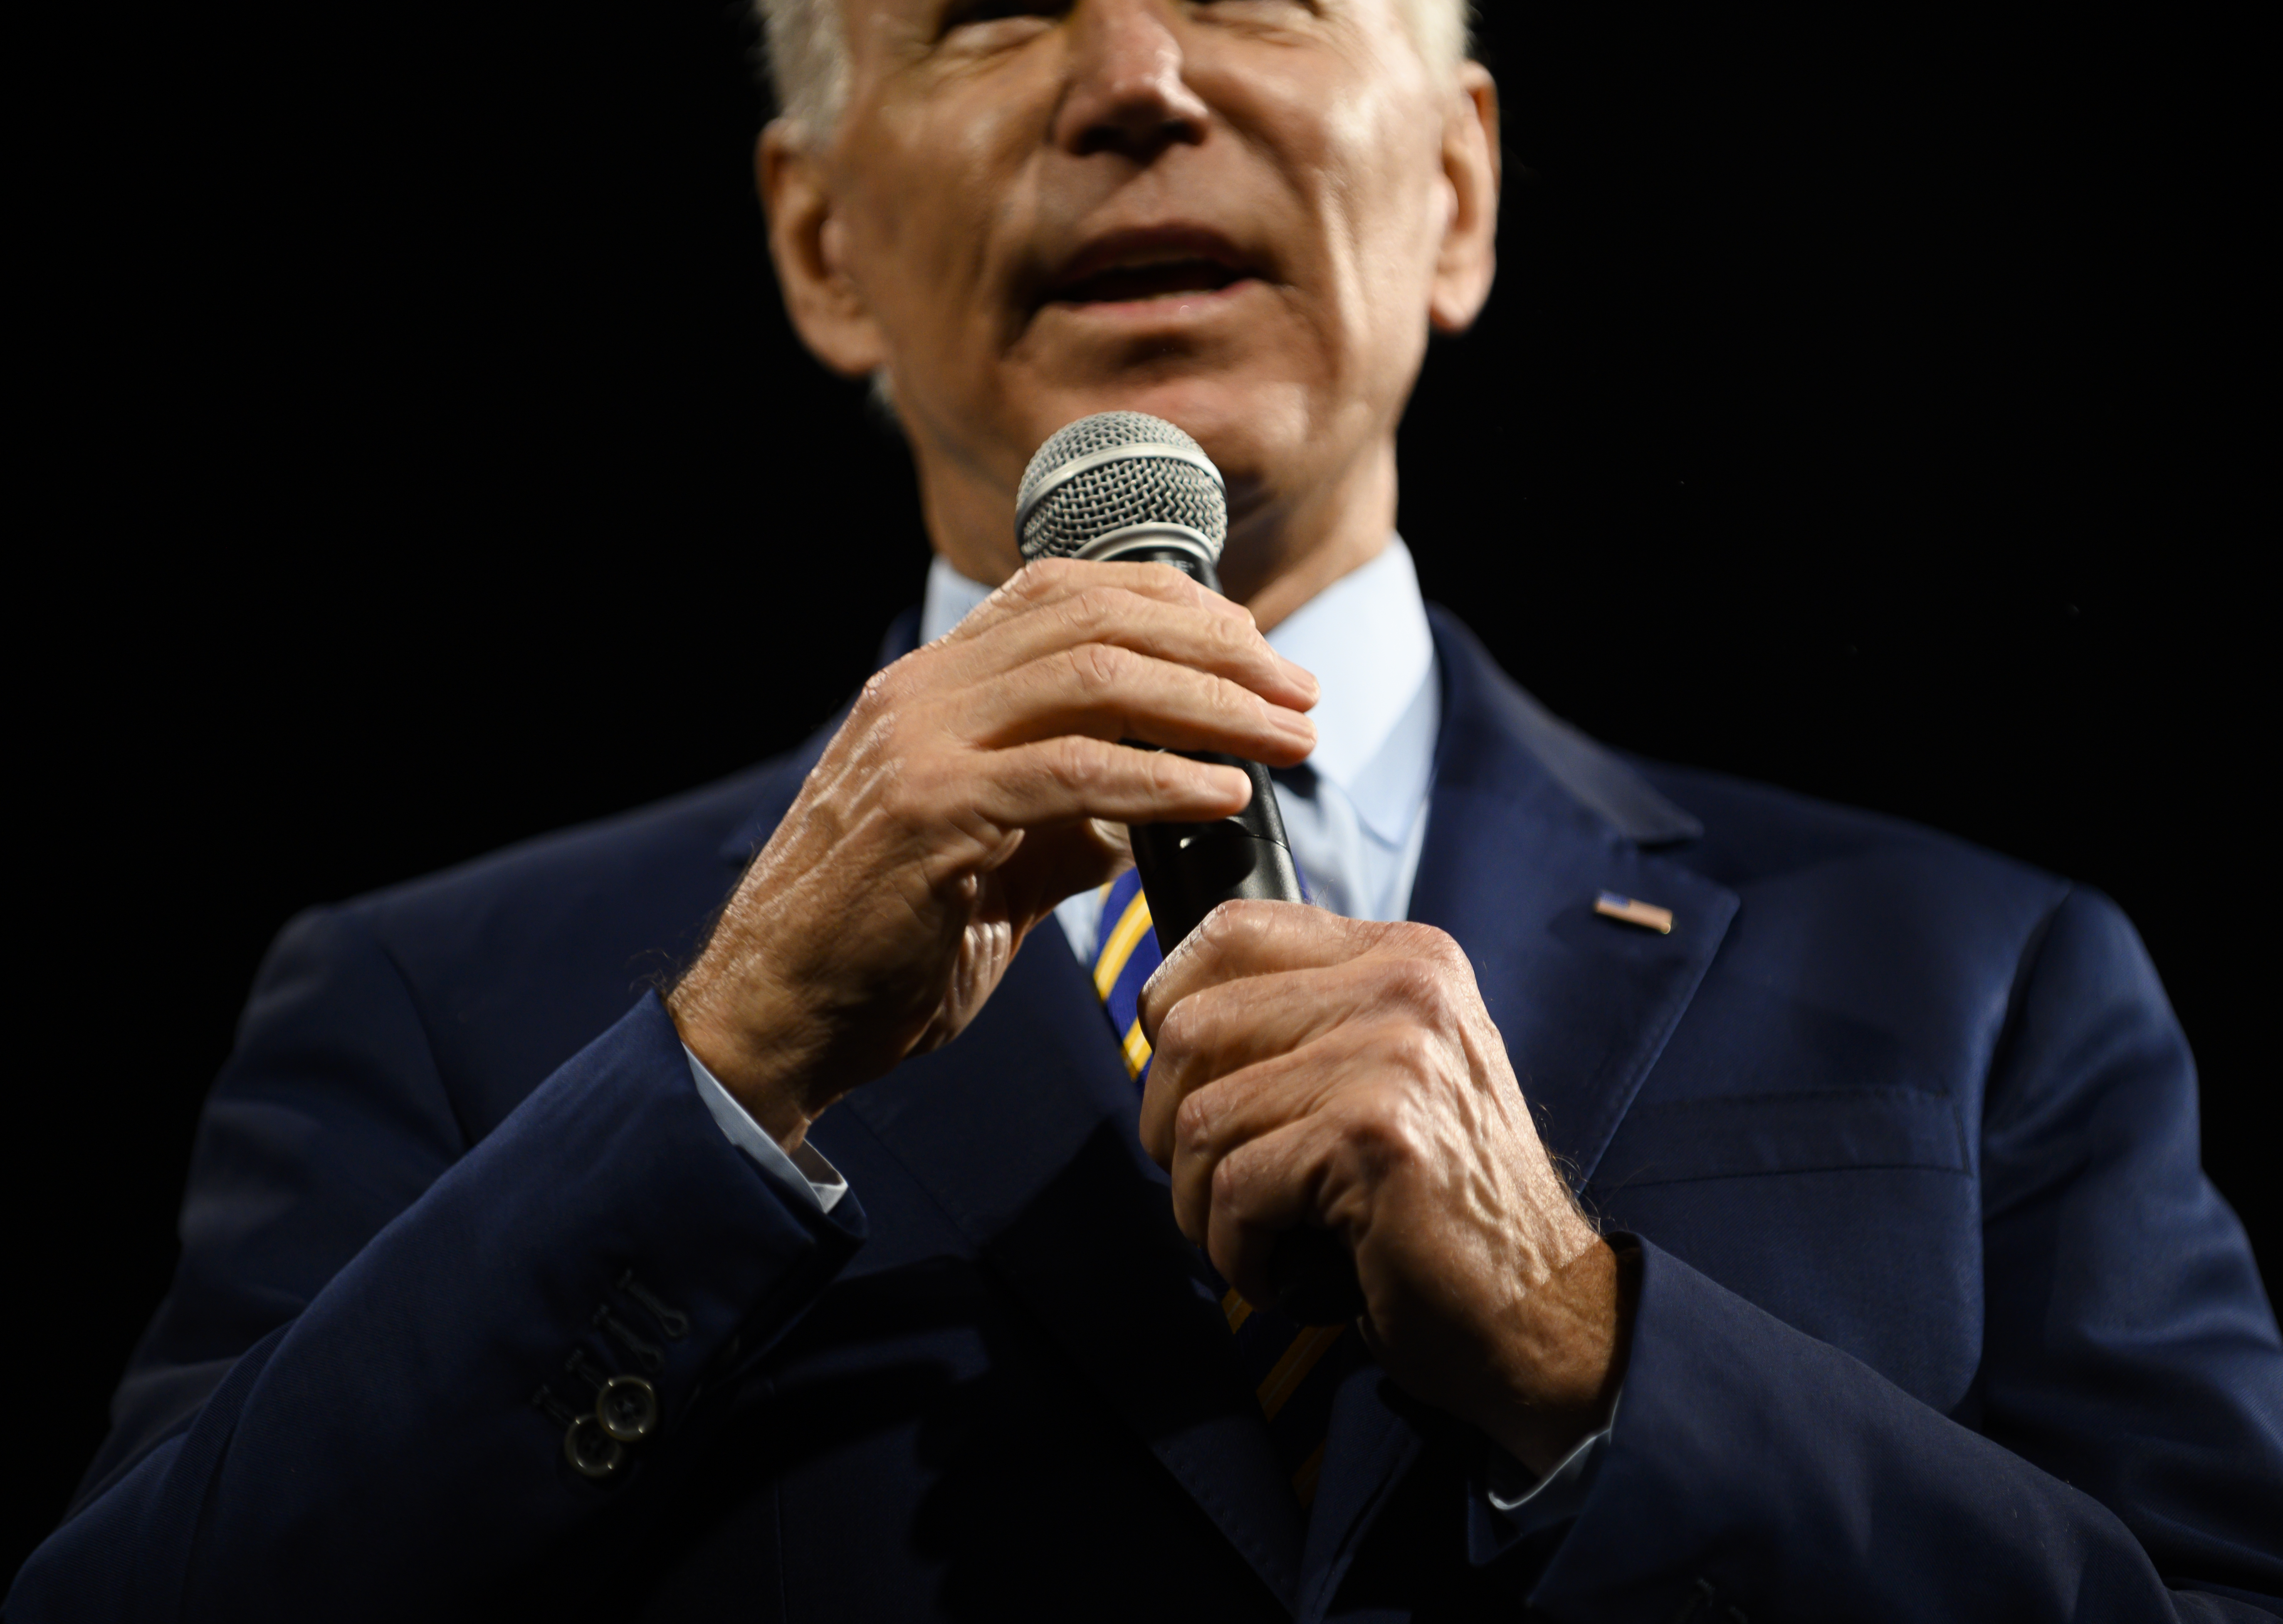 DES MOINES, IA - AUGUST 10: Democratic presidential candidate and former Vice President Joe Biden speaks on stage during a forum on gun safety at the Iowa Events Center on August 10, 2019 in Des Moines, Iowa. The event was hosted by Everytown for Gun Safety. (Photo by Stephen Maturen/Getty Images)